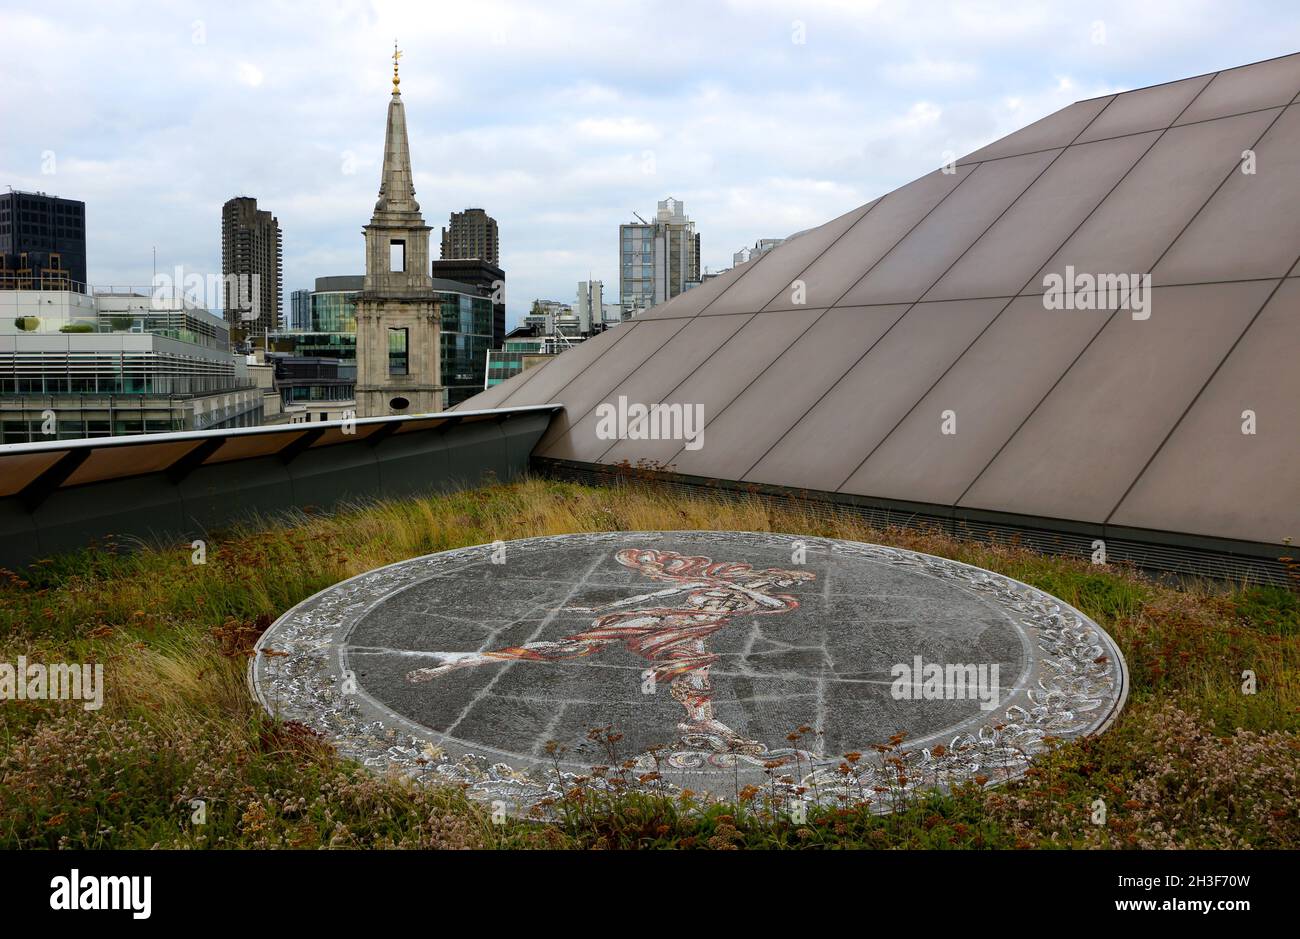 Ariel mosaic by Boris Anrep seen from the rooftop of One New Change shopping centre in the City of London England on a cloudy October afternoon Stock Photo